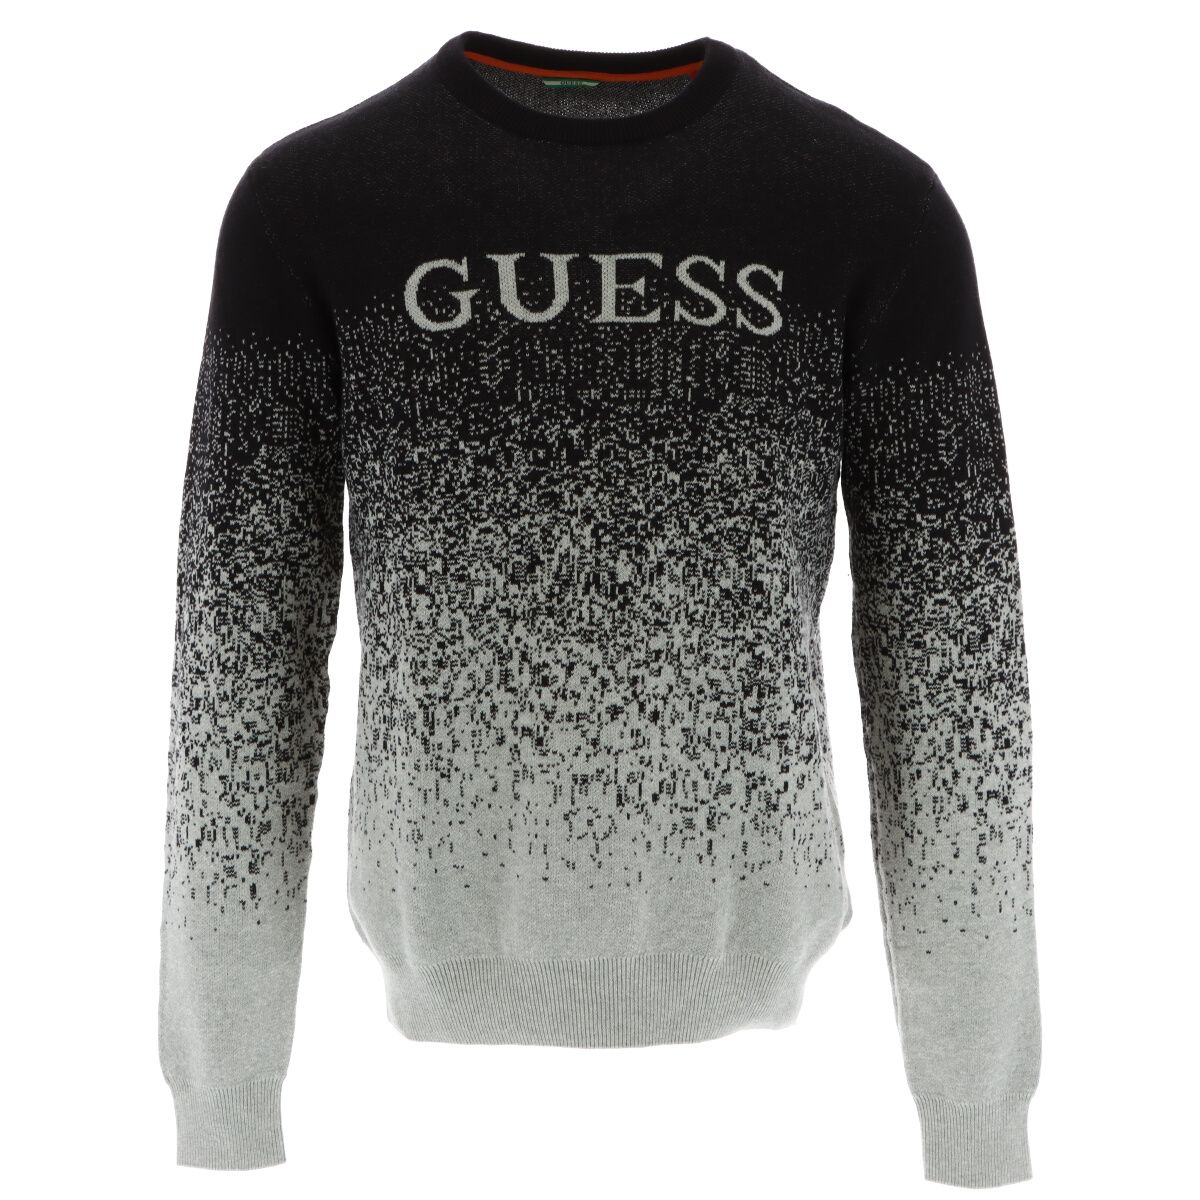 Brand: Guess Gender: Men Type: Knitwear Season: Fall/Winter  PRODUCT DETAIL • Color: black • Pattern: coloured • Sleeves: long • Neckline: round neck •  Article code: M0YR48Z2NO0  COMPOSITION AND MATERIAL • Composition: -80% cotton -20% polyamide  •  Washing: handwash. print:printed. material:denim. type:trench-coat